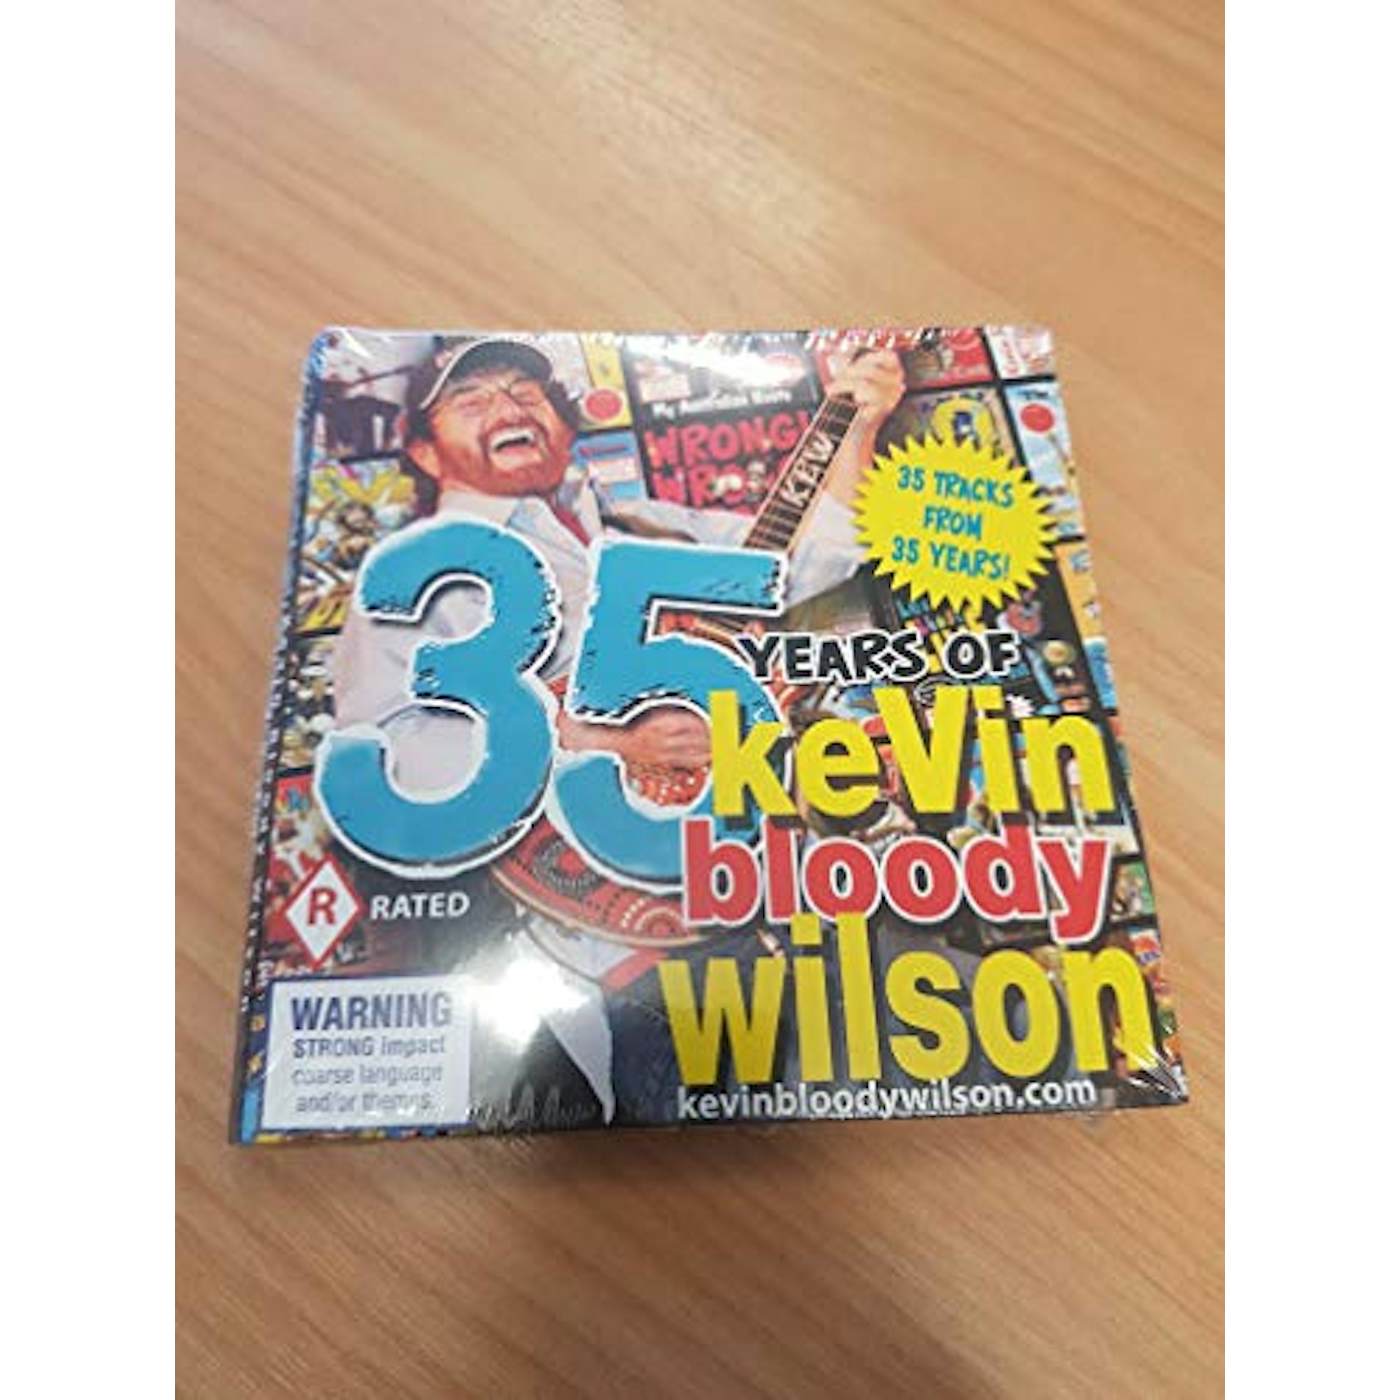 35 YEARS OF KEVIN BLOODY WILSON CD